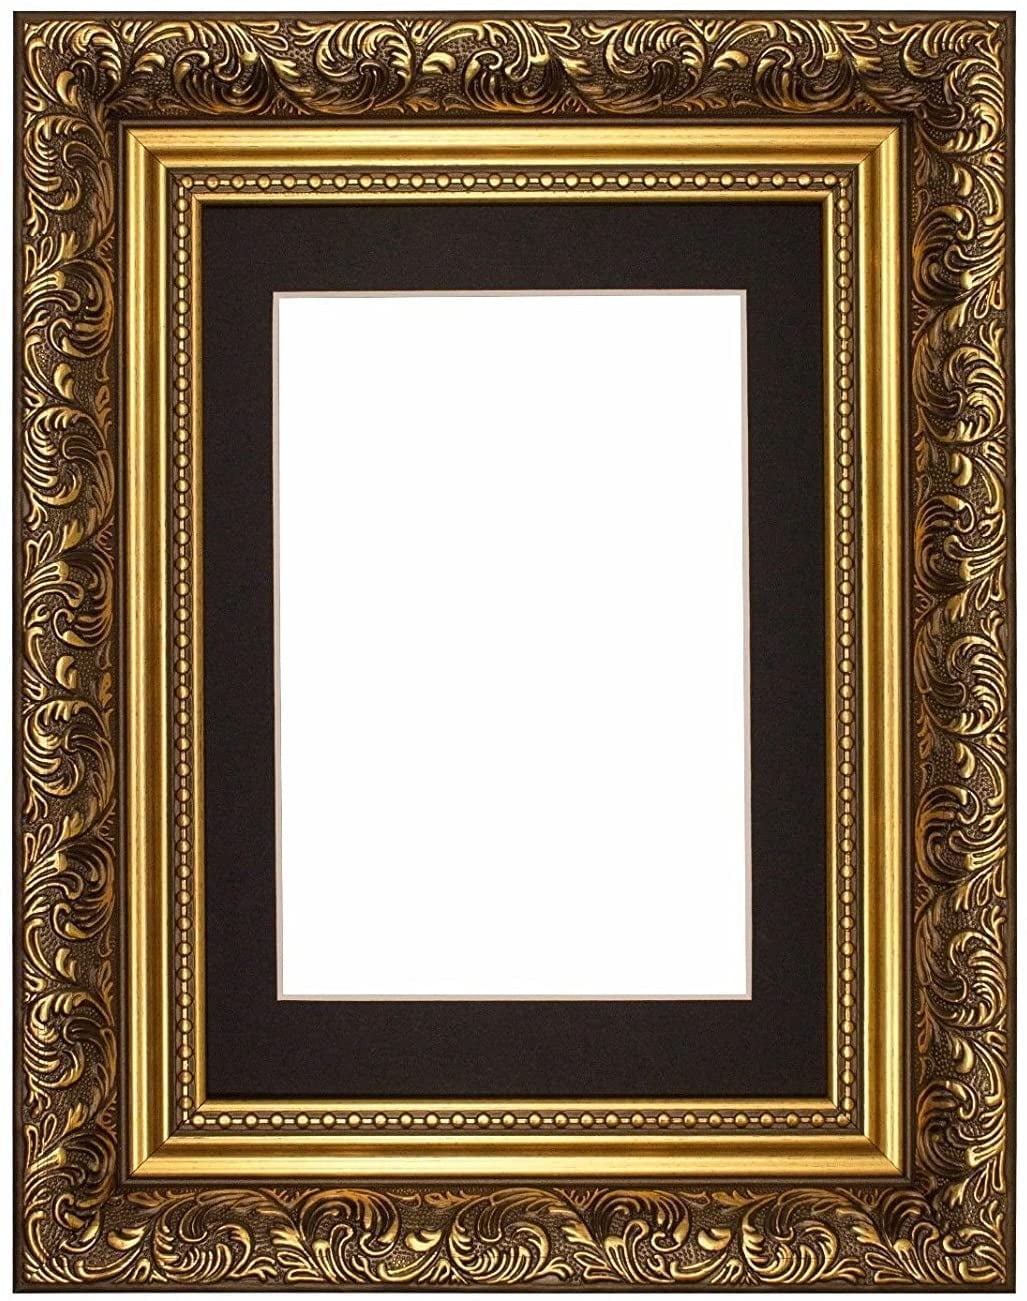 Details about   Ornate Antique Style Picture Frame French Baroque Style show original title 